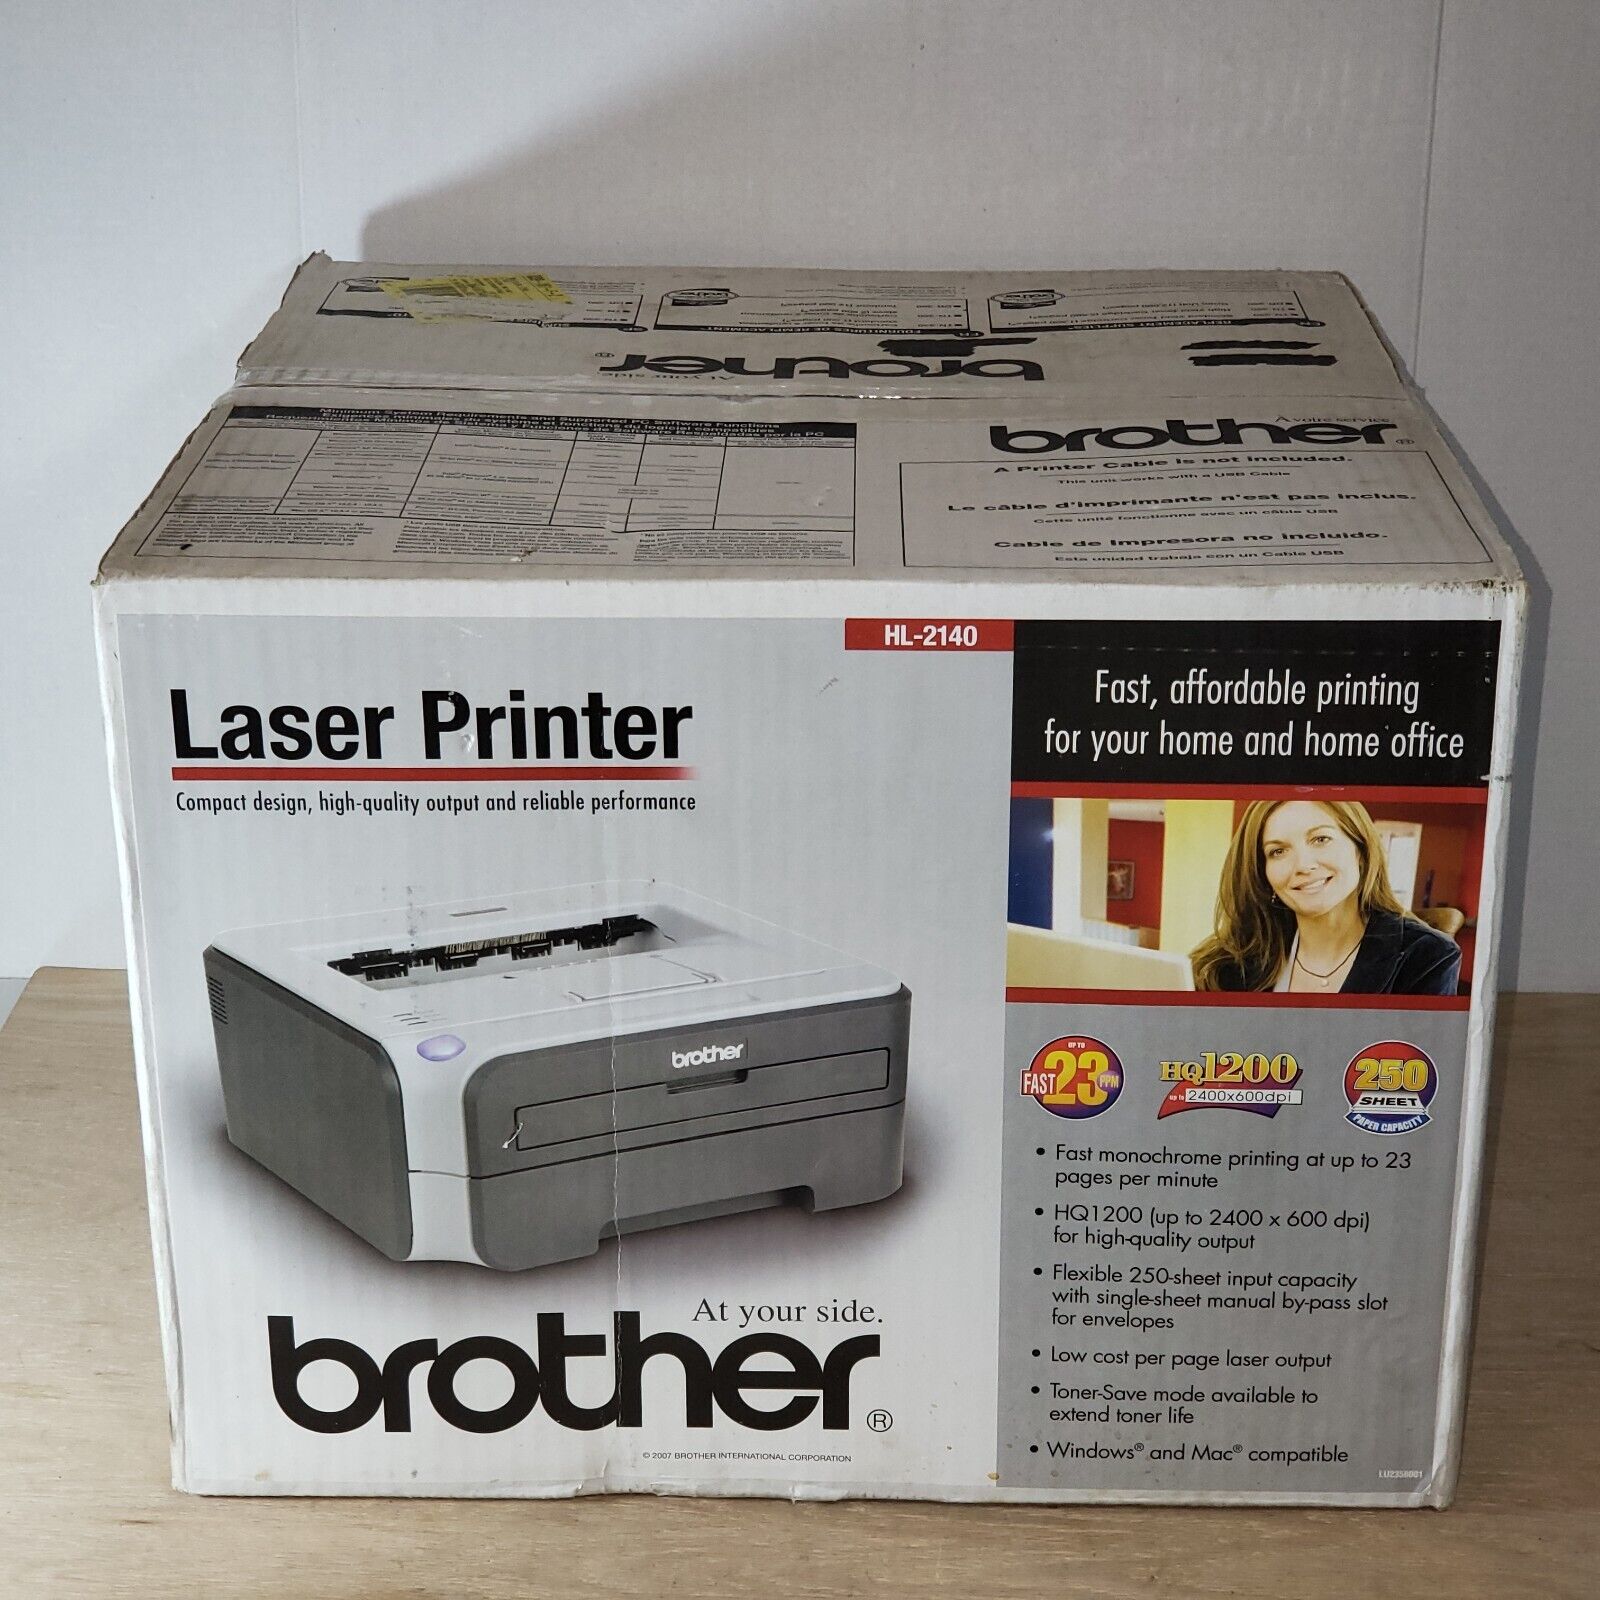 Brother HL-2140 Standard Laser Printer NOS New in Box Never Used w/Box Damage 